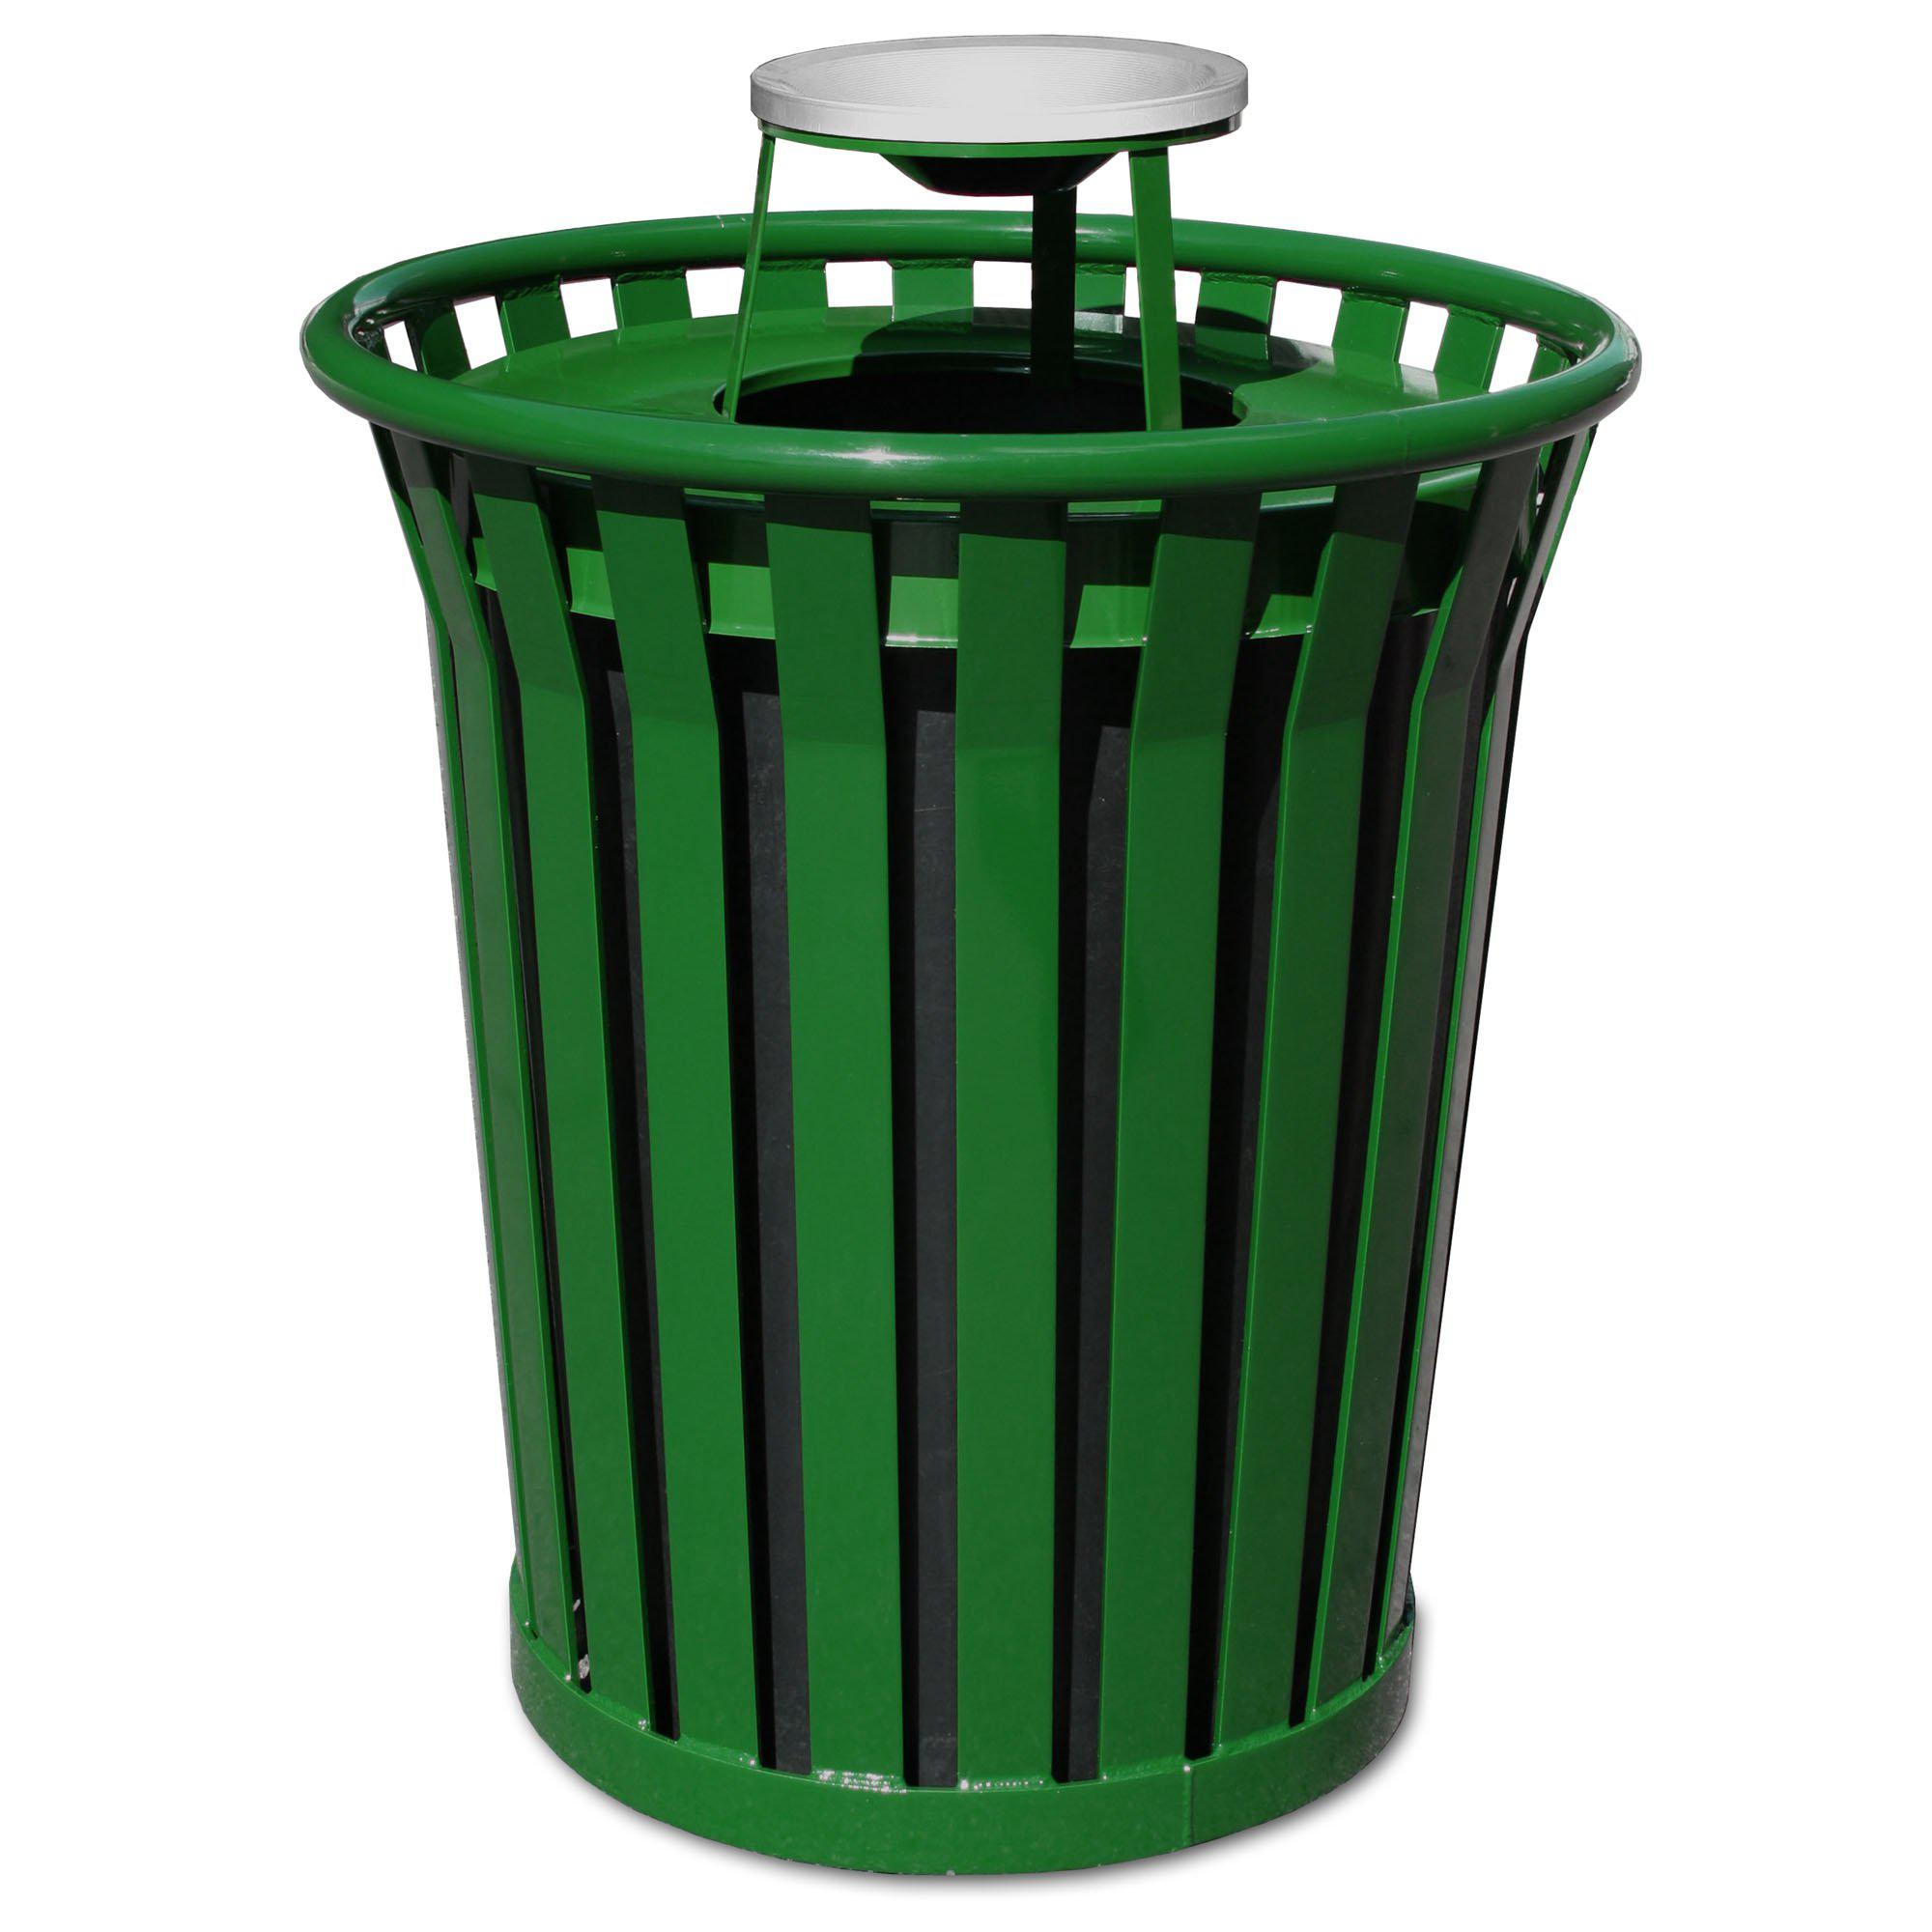 Wydman Collection Heavy Duty Slatted Outdoor Trash Receptacle with Ash Top, 36-Gallon Capacity